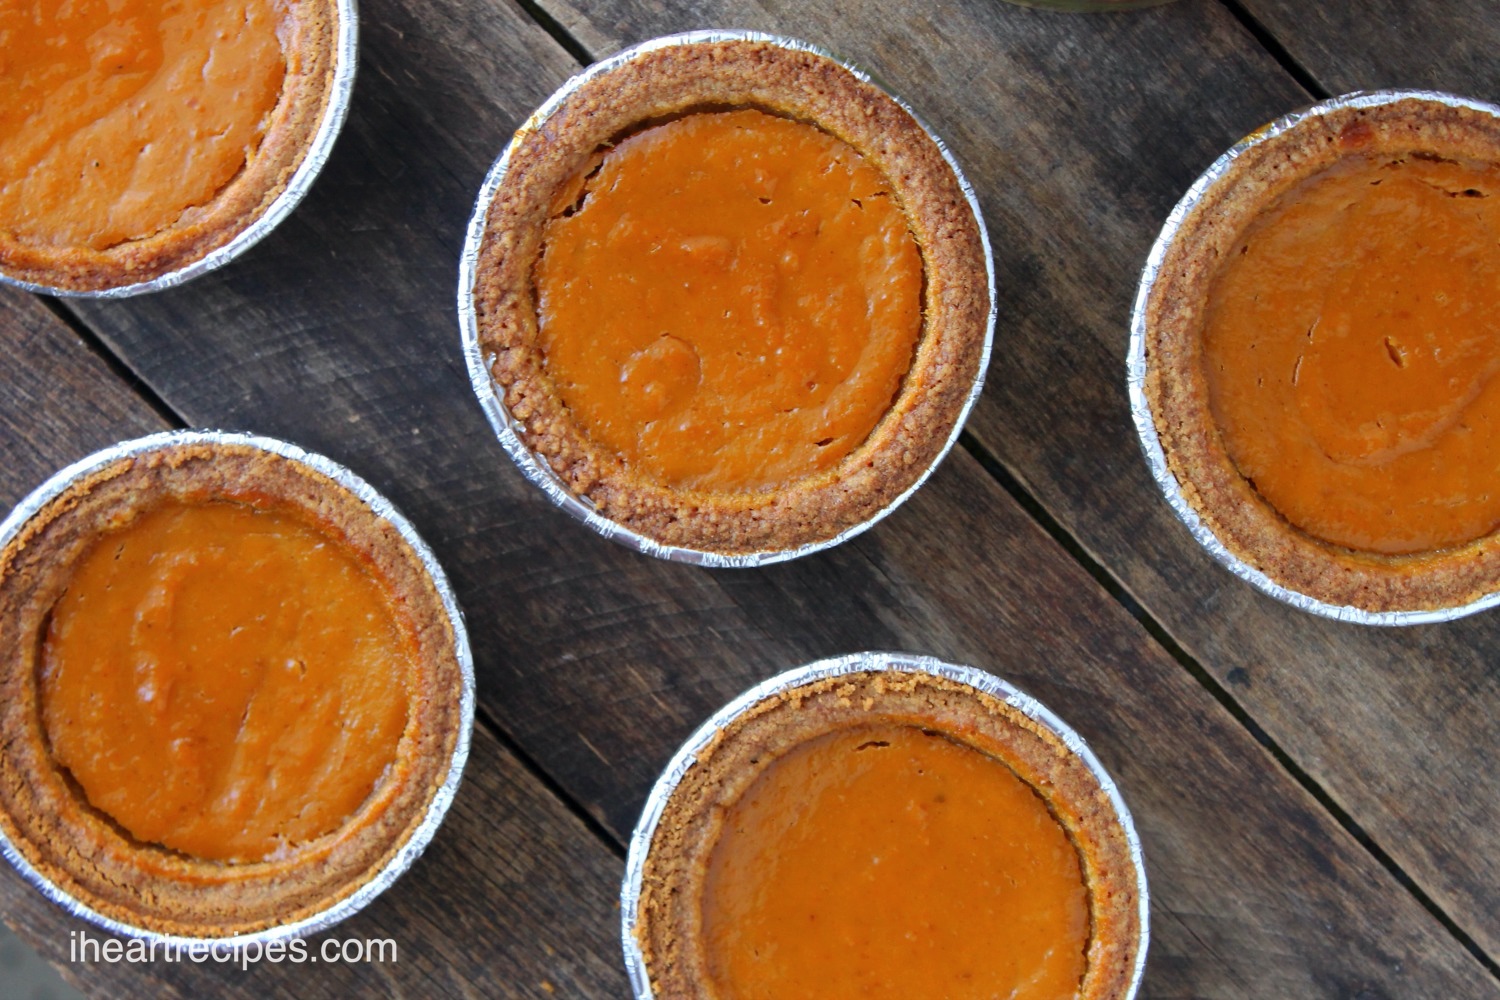 Personal pumpkin pies are the perfect holiday treat.